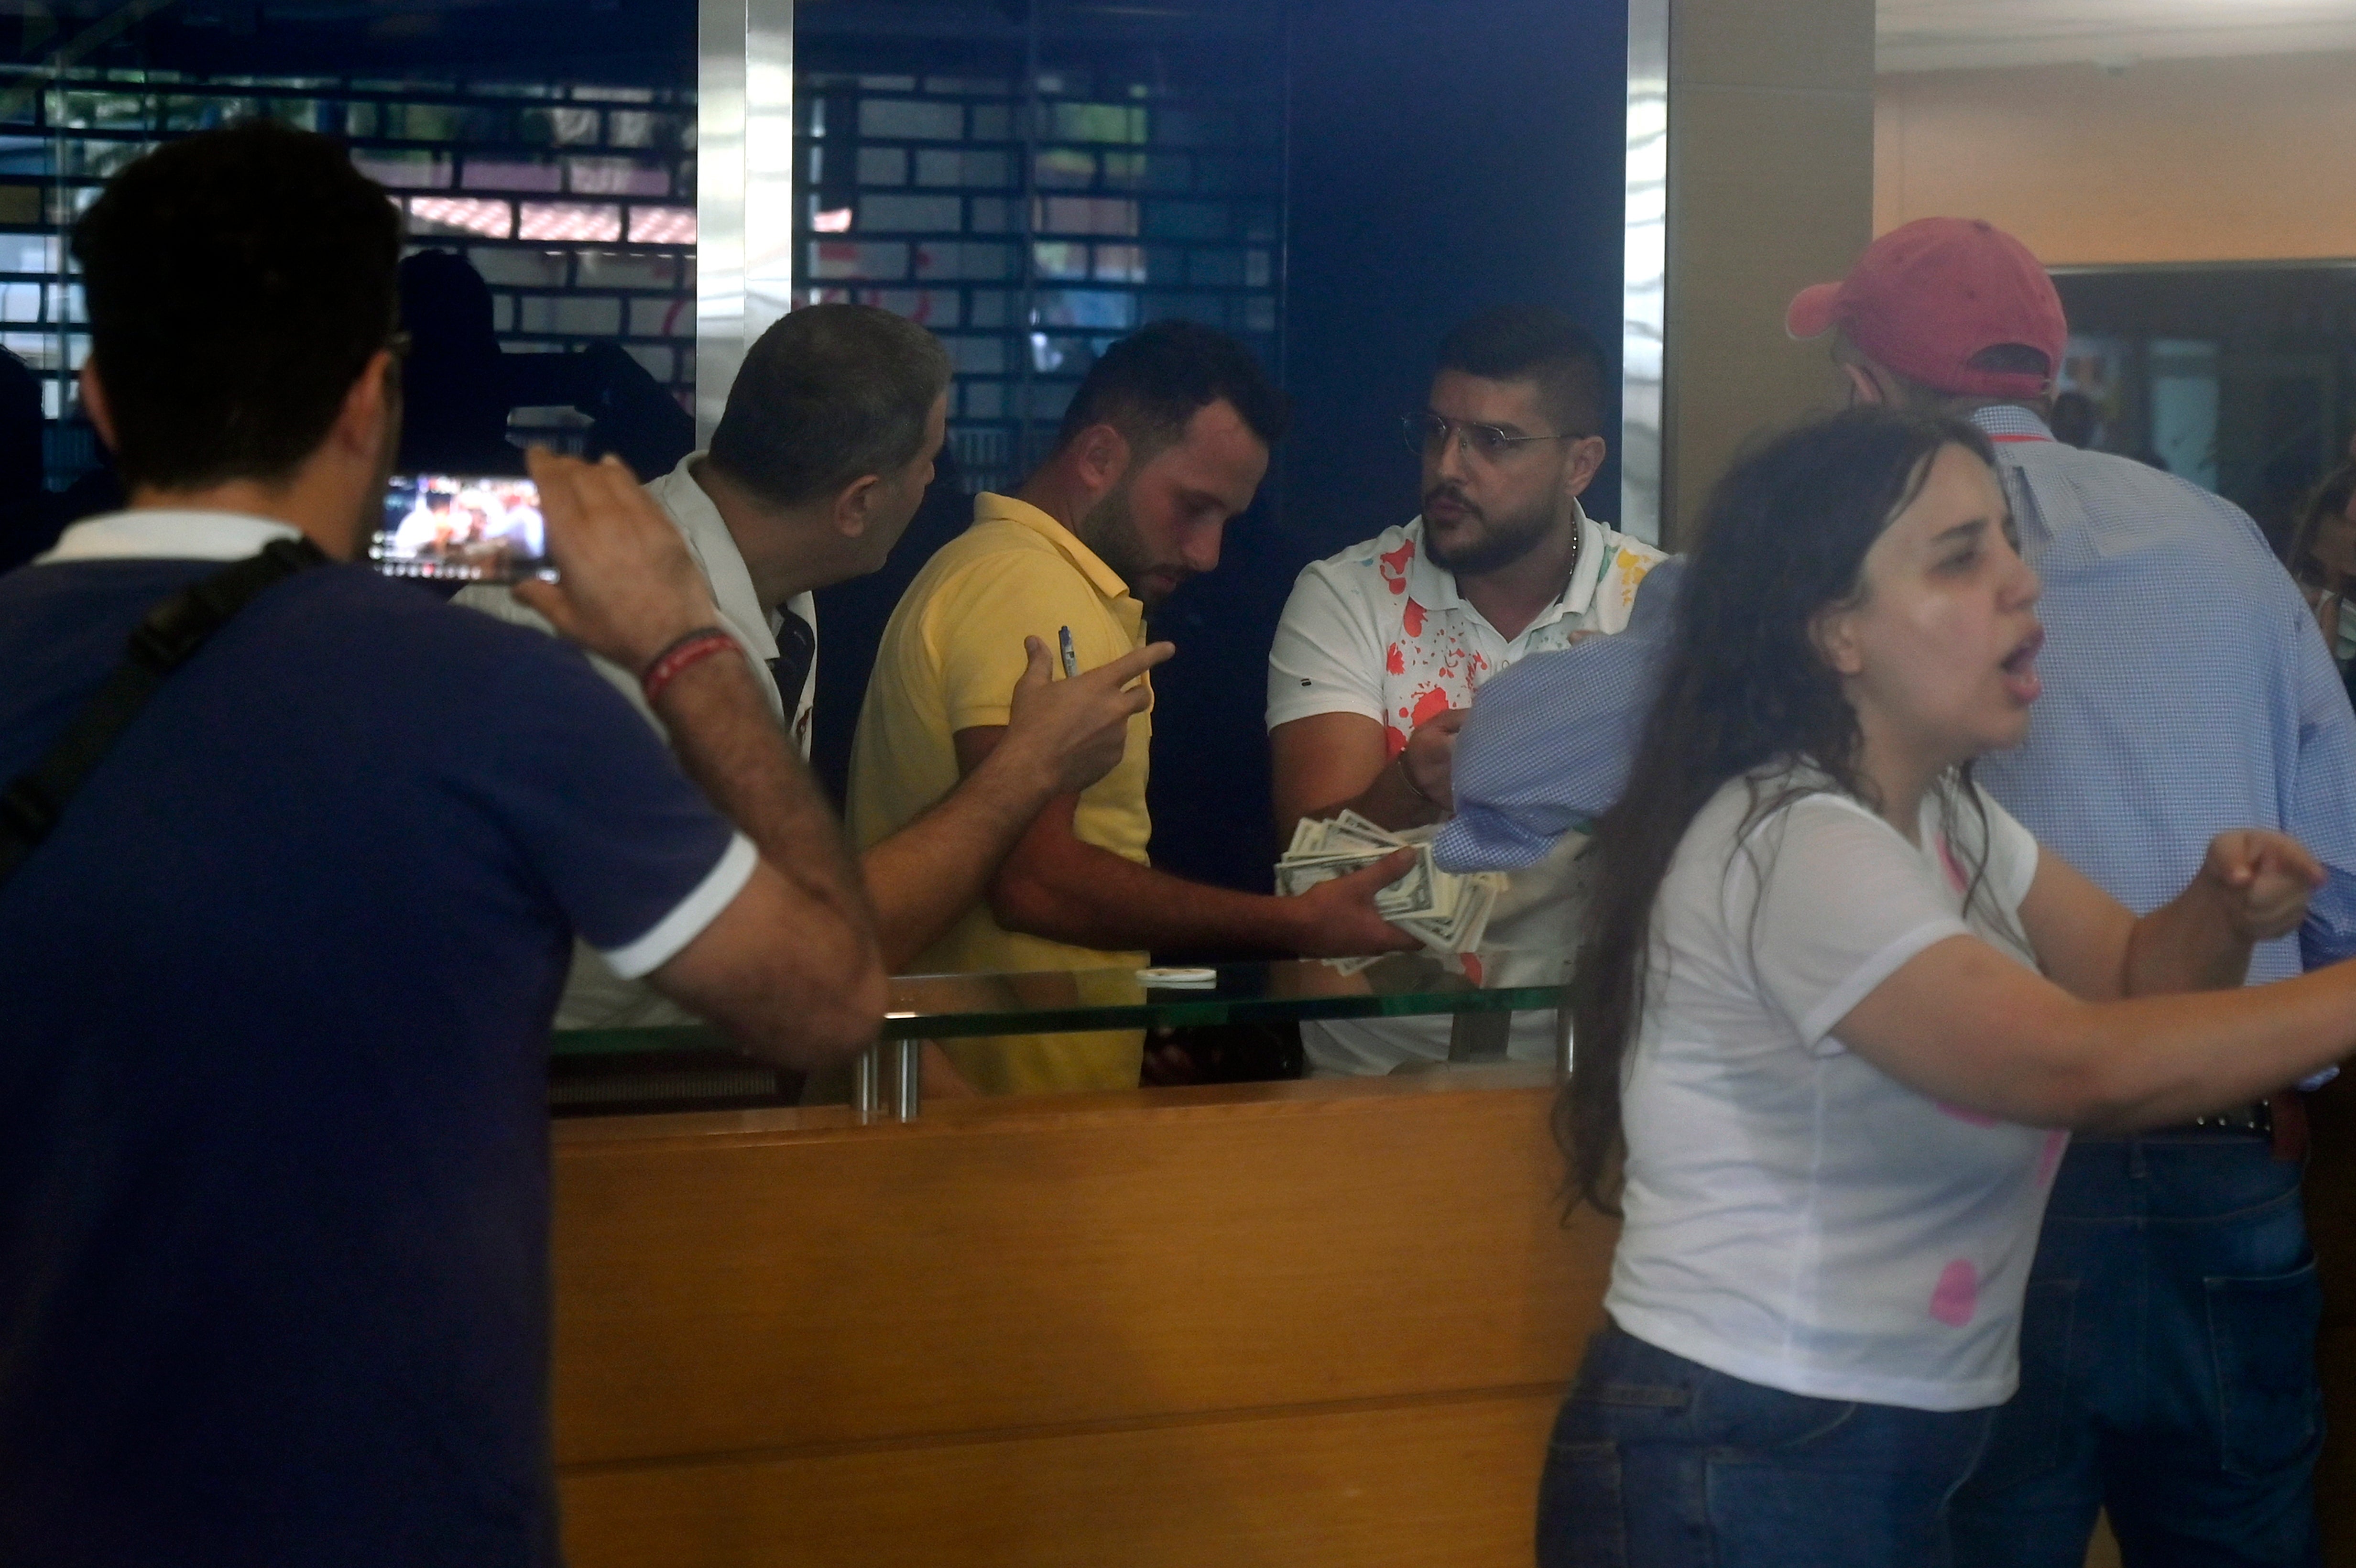 A Lebanese bank worker holds notes during the drama